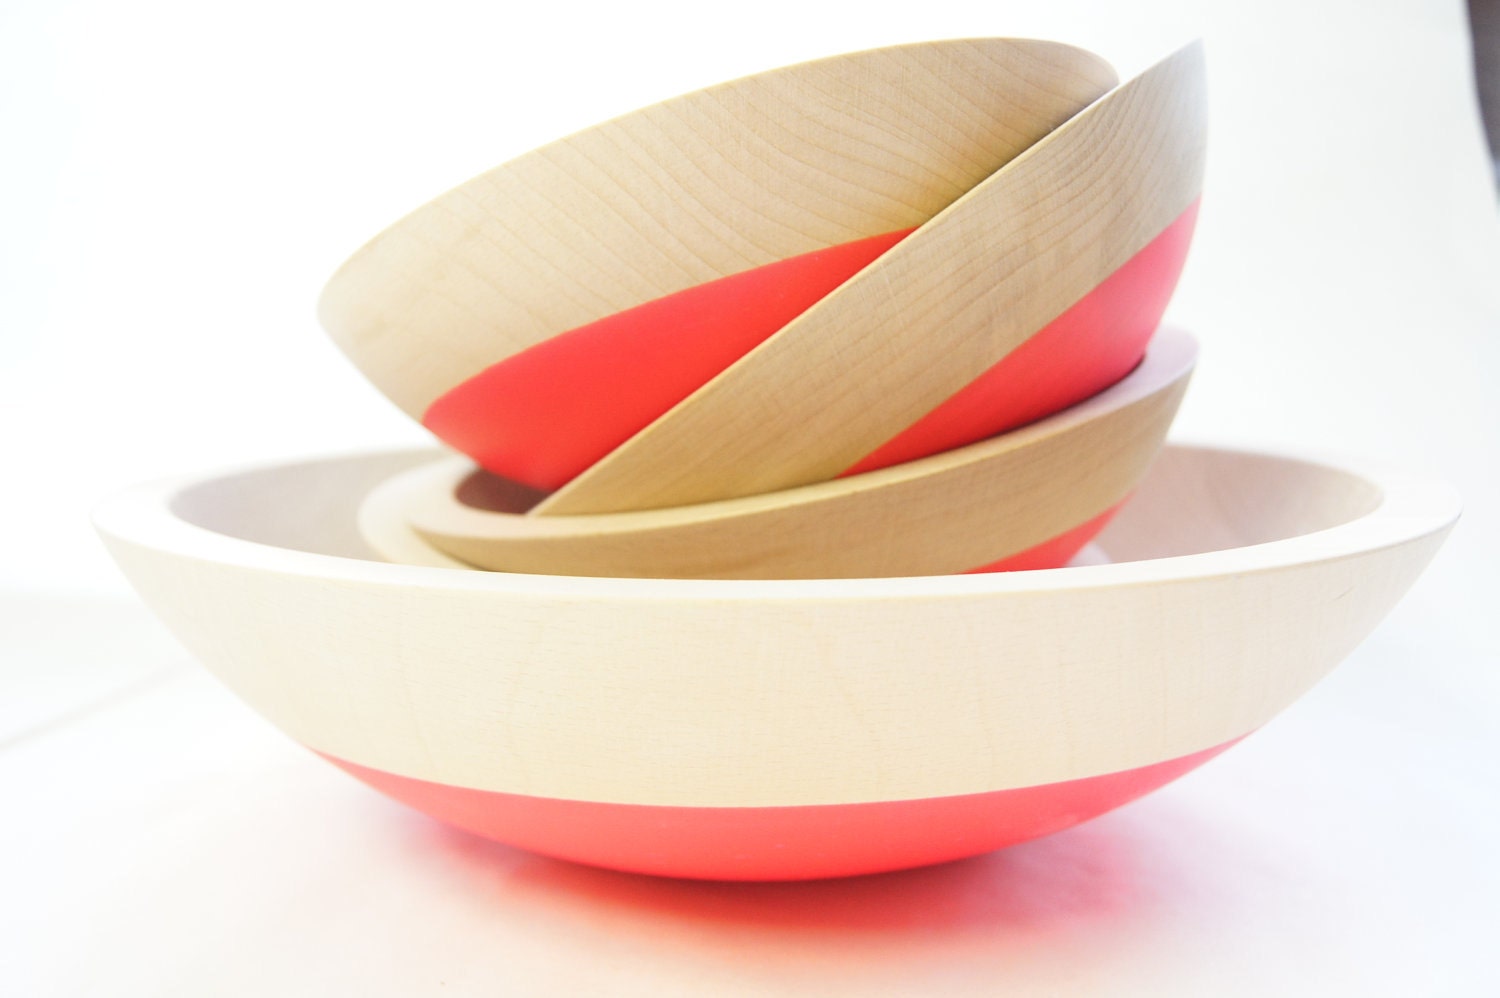 Wooden Salad Bowl Set of 5, Neon Pink, Summer Party, Picnic,